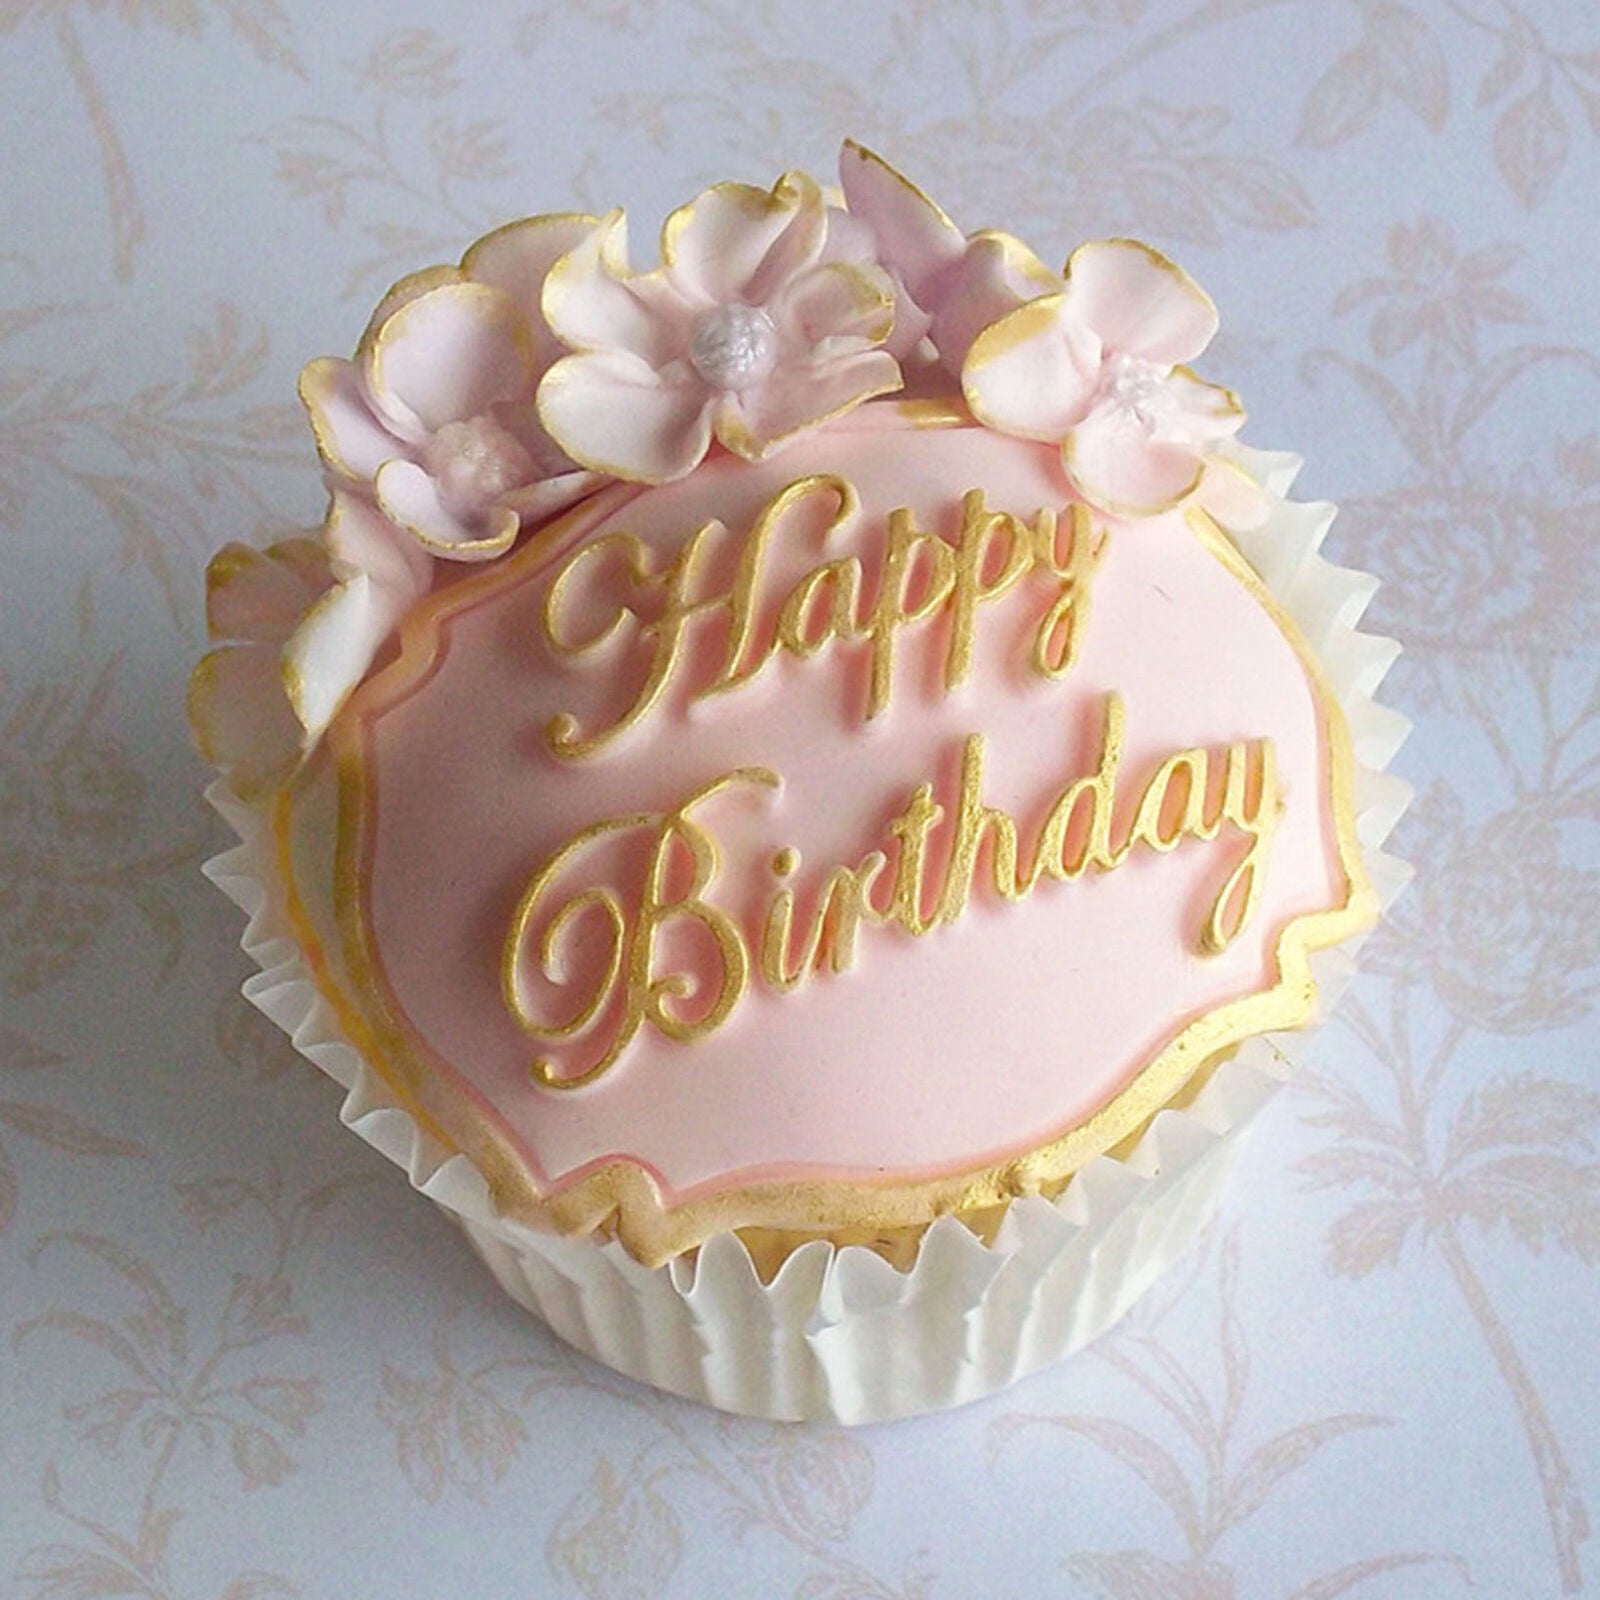 Happy Birthday Silicone Cake Fondant Mould Decorating Chocolate Baking Mold IN